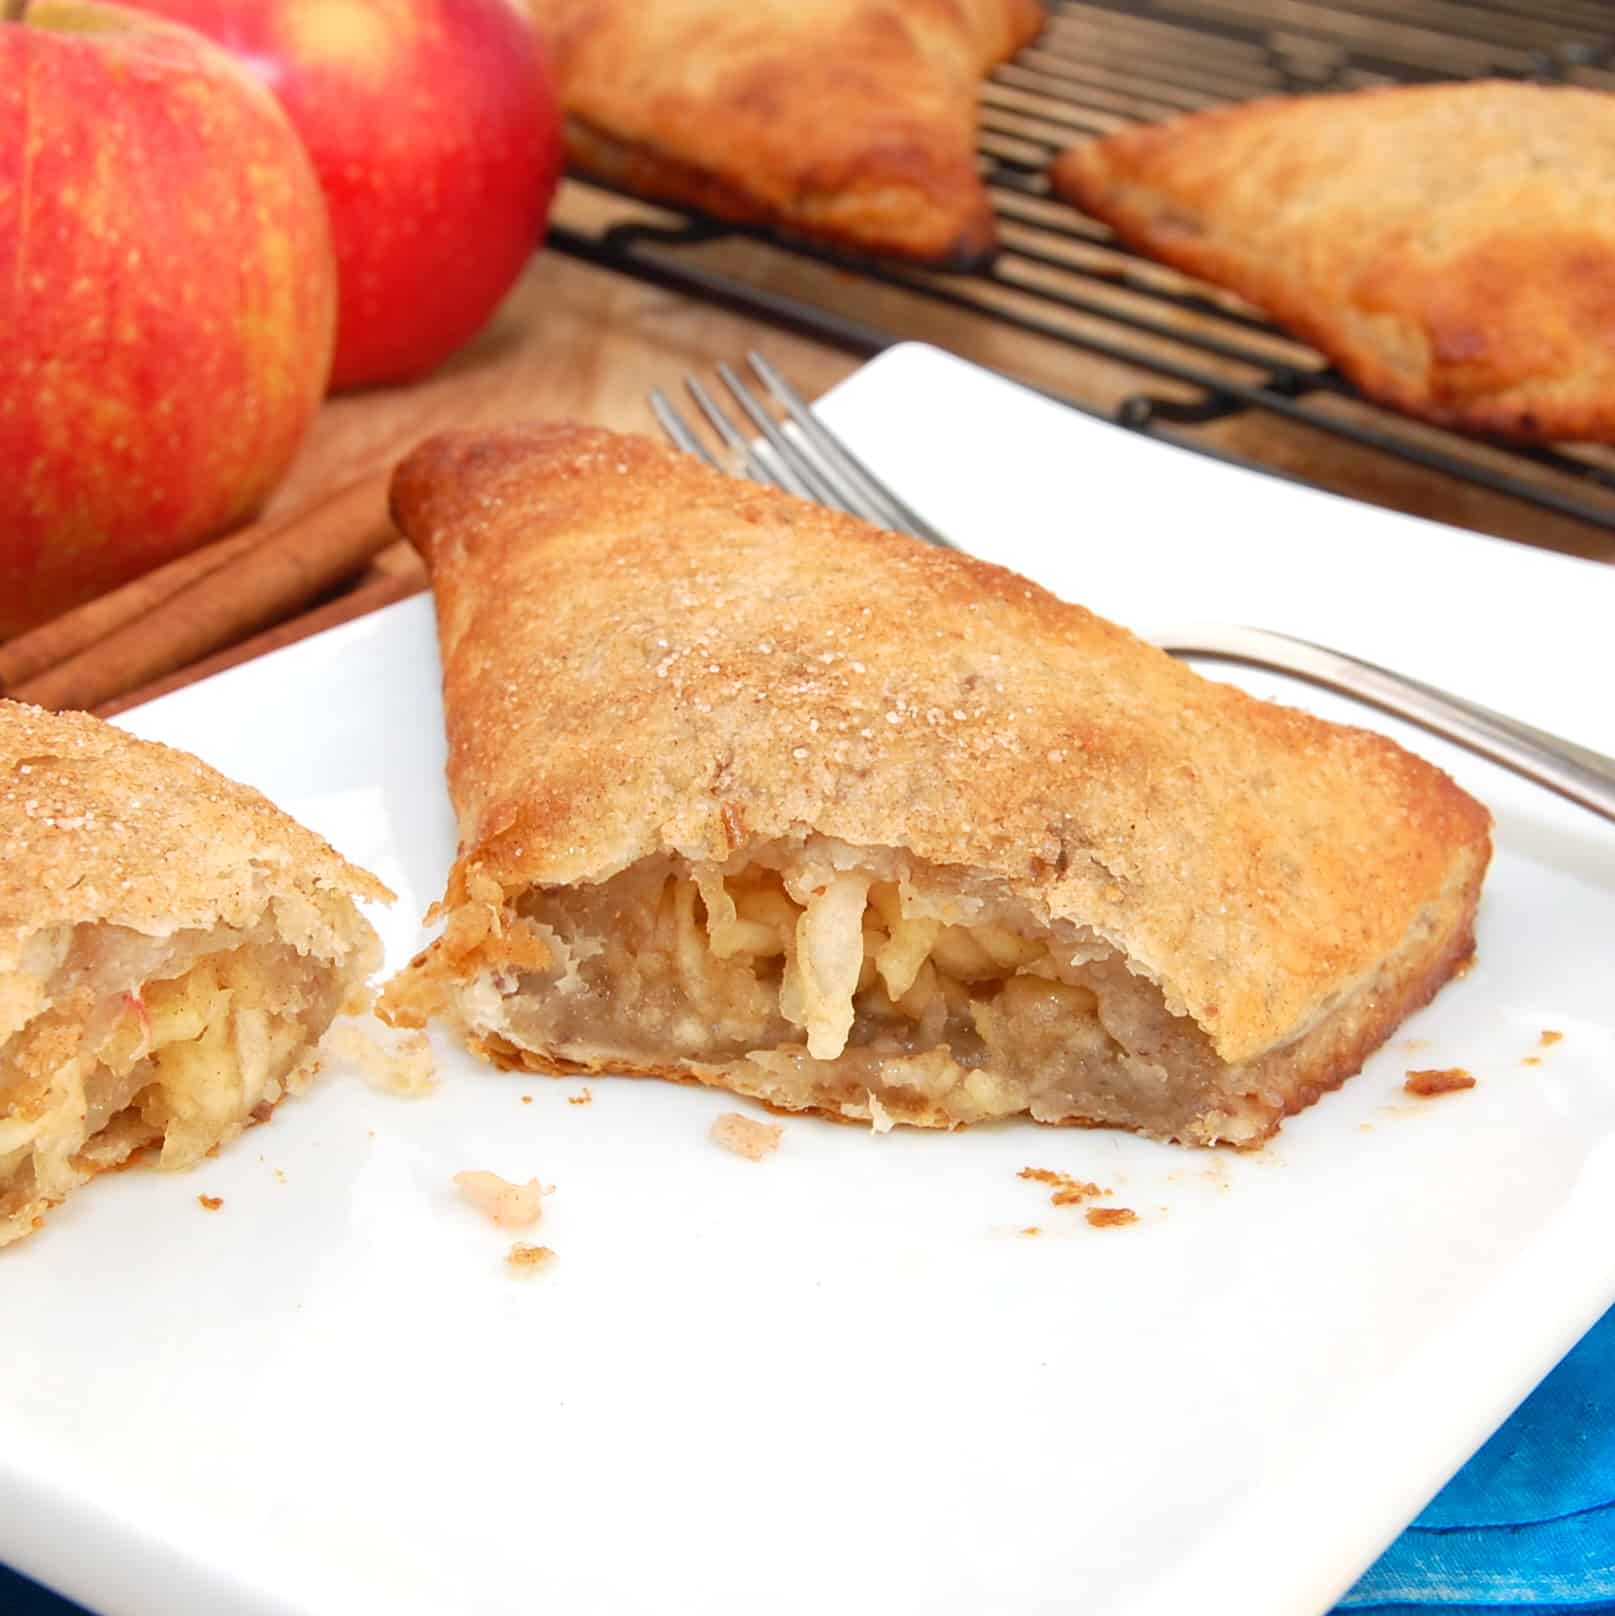 ready to serve homemade apple turnover